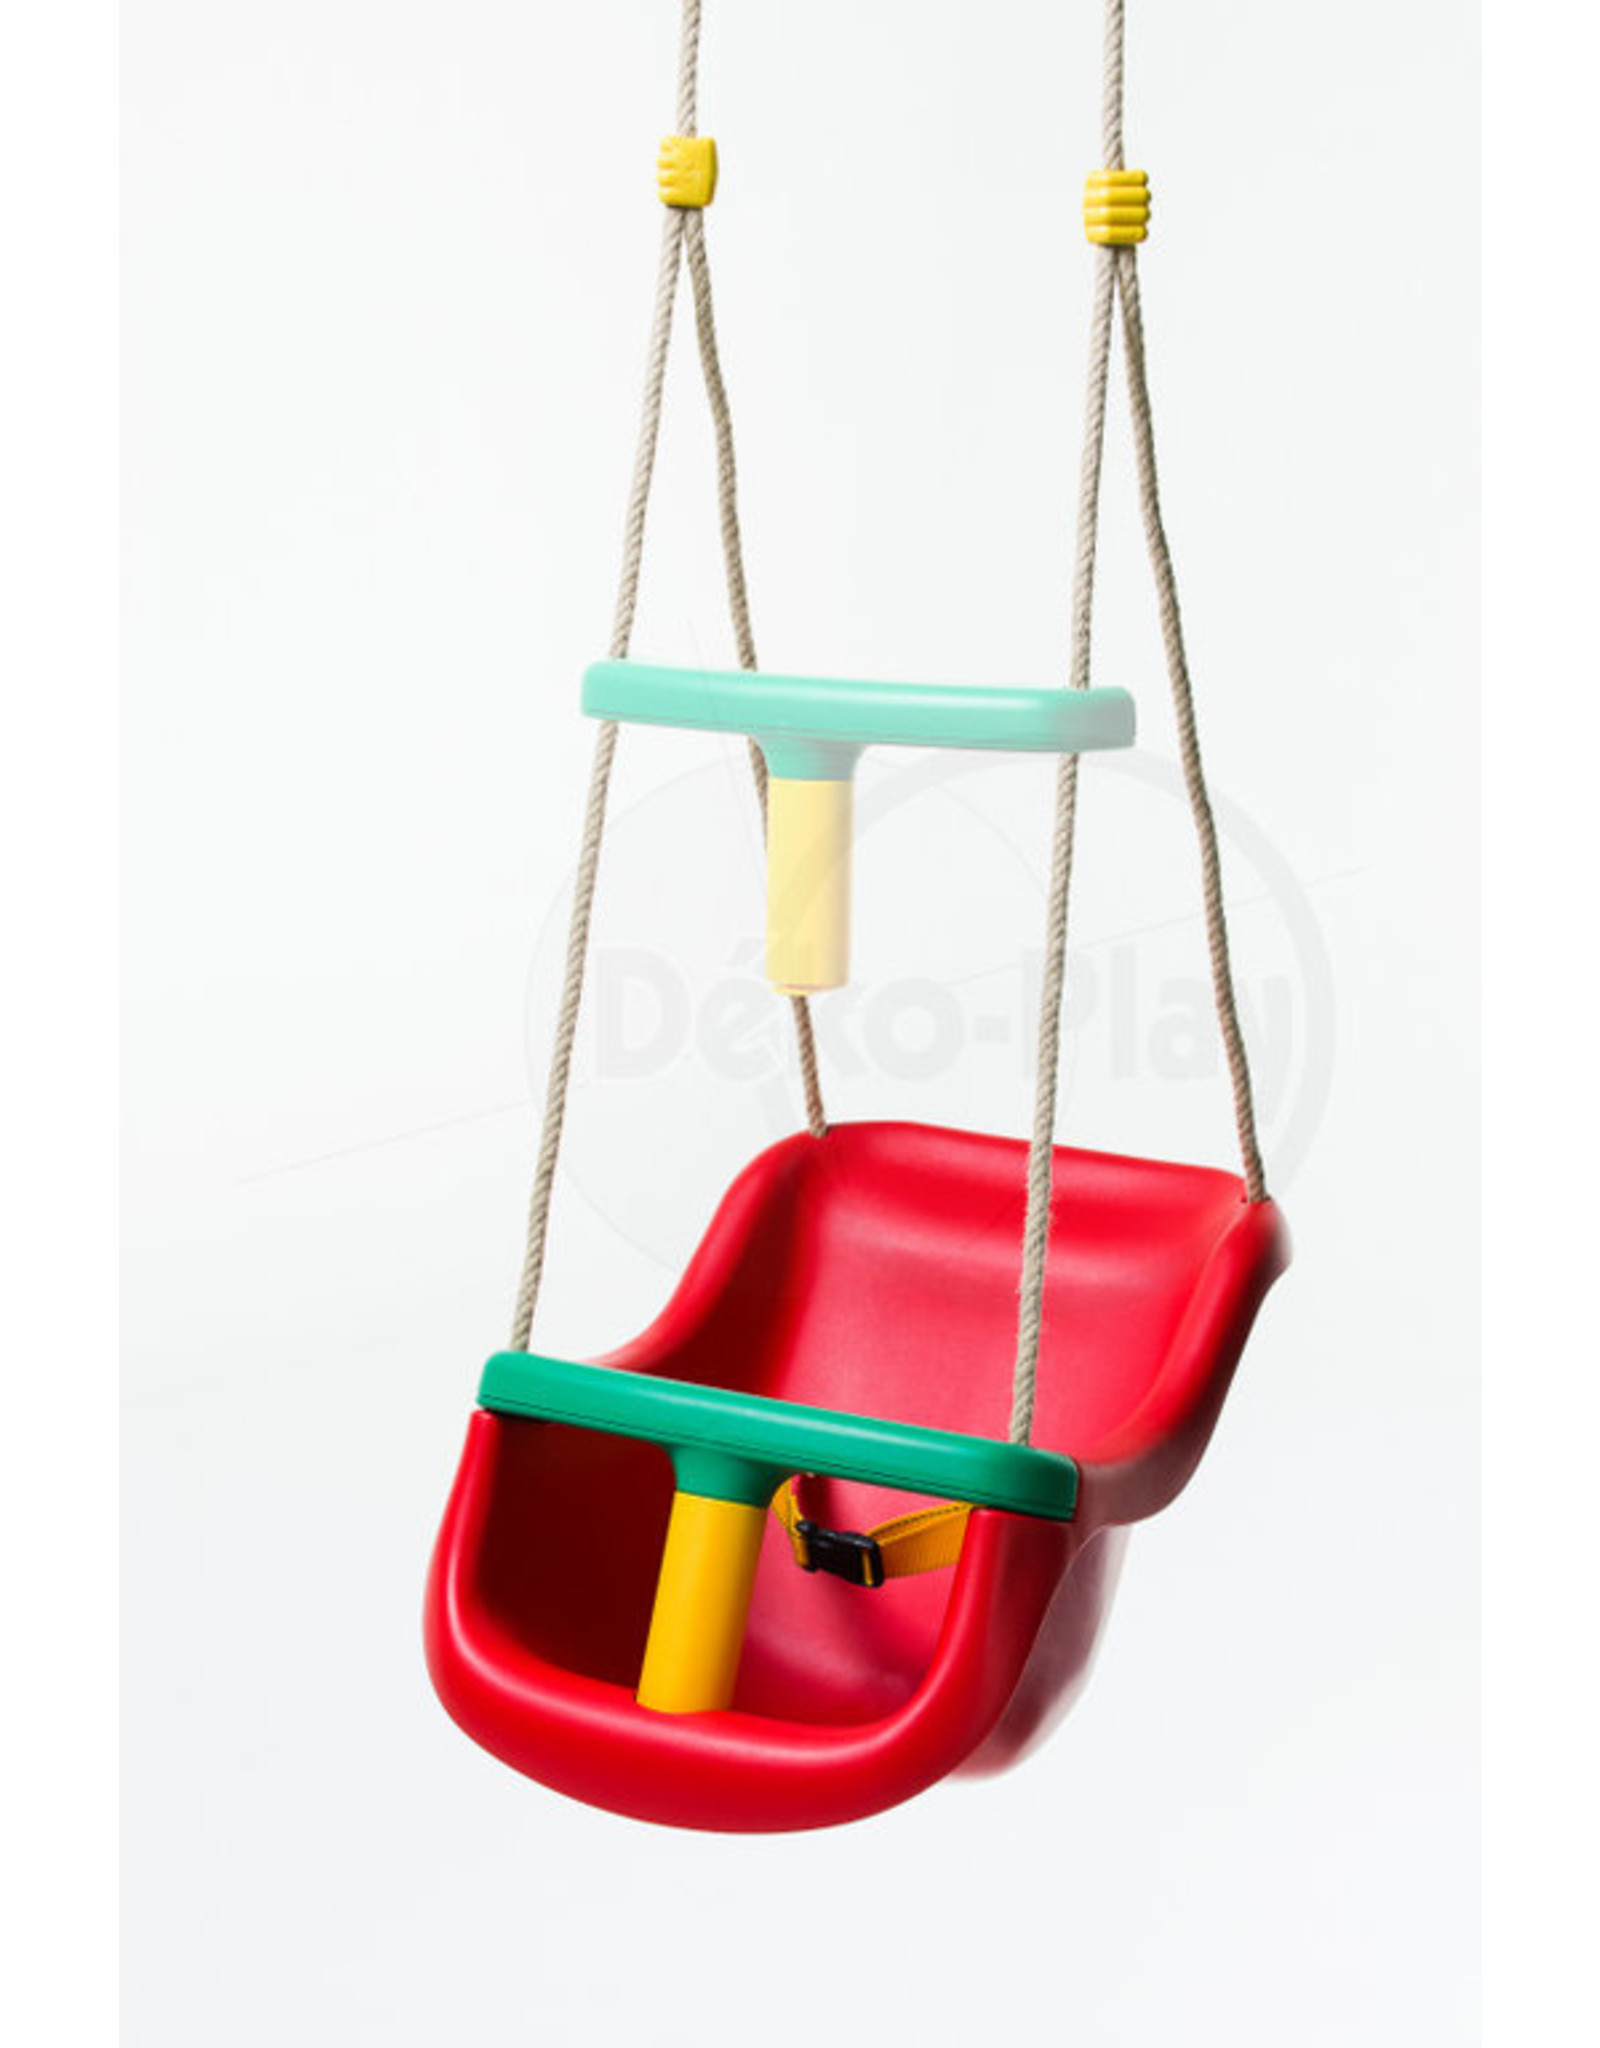 Déko-Play Déko-Play toddler swingseat Red with PH ropes